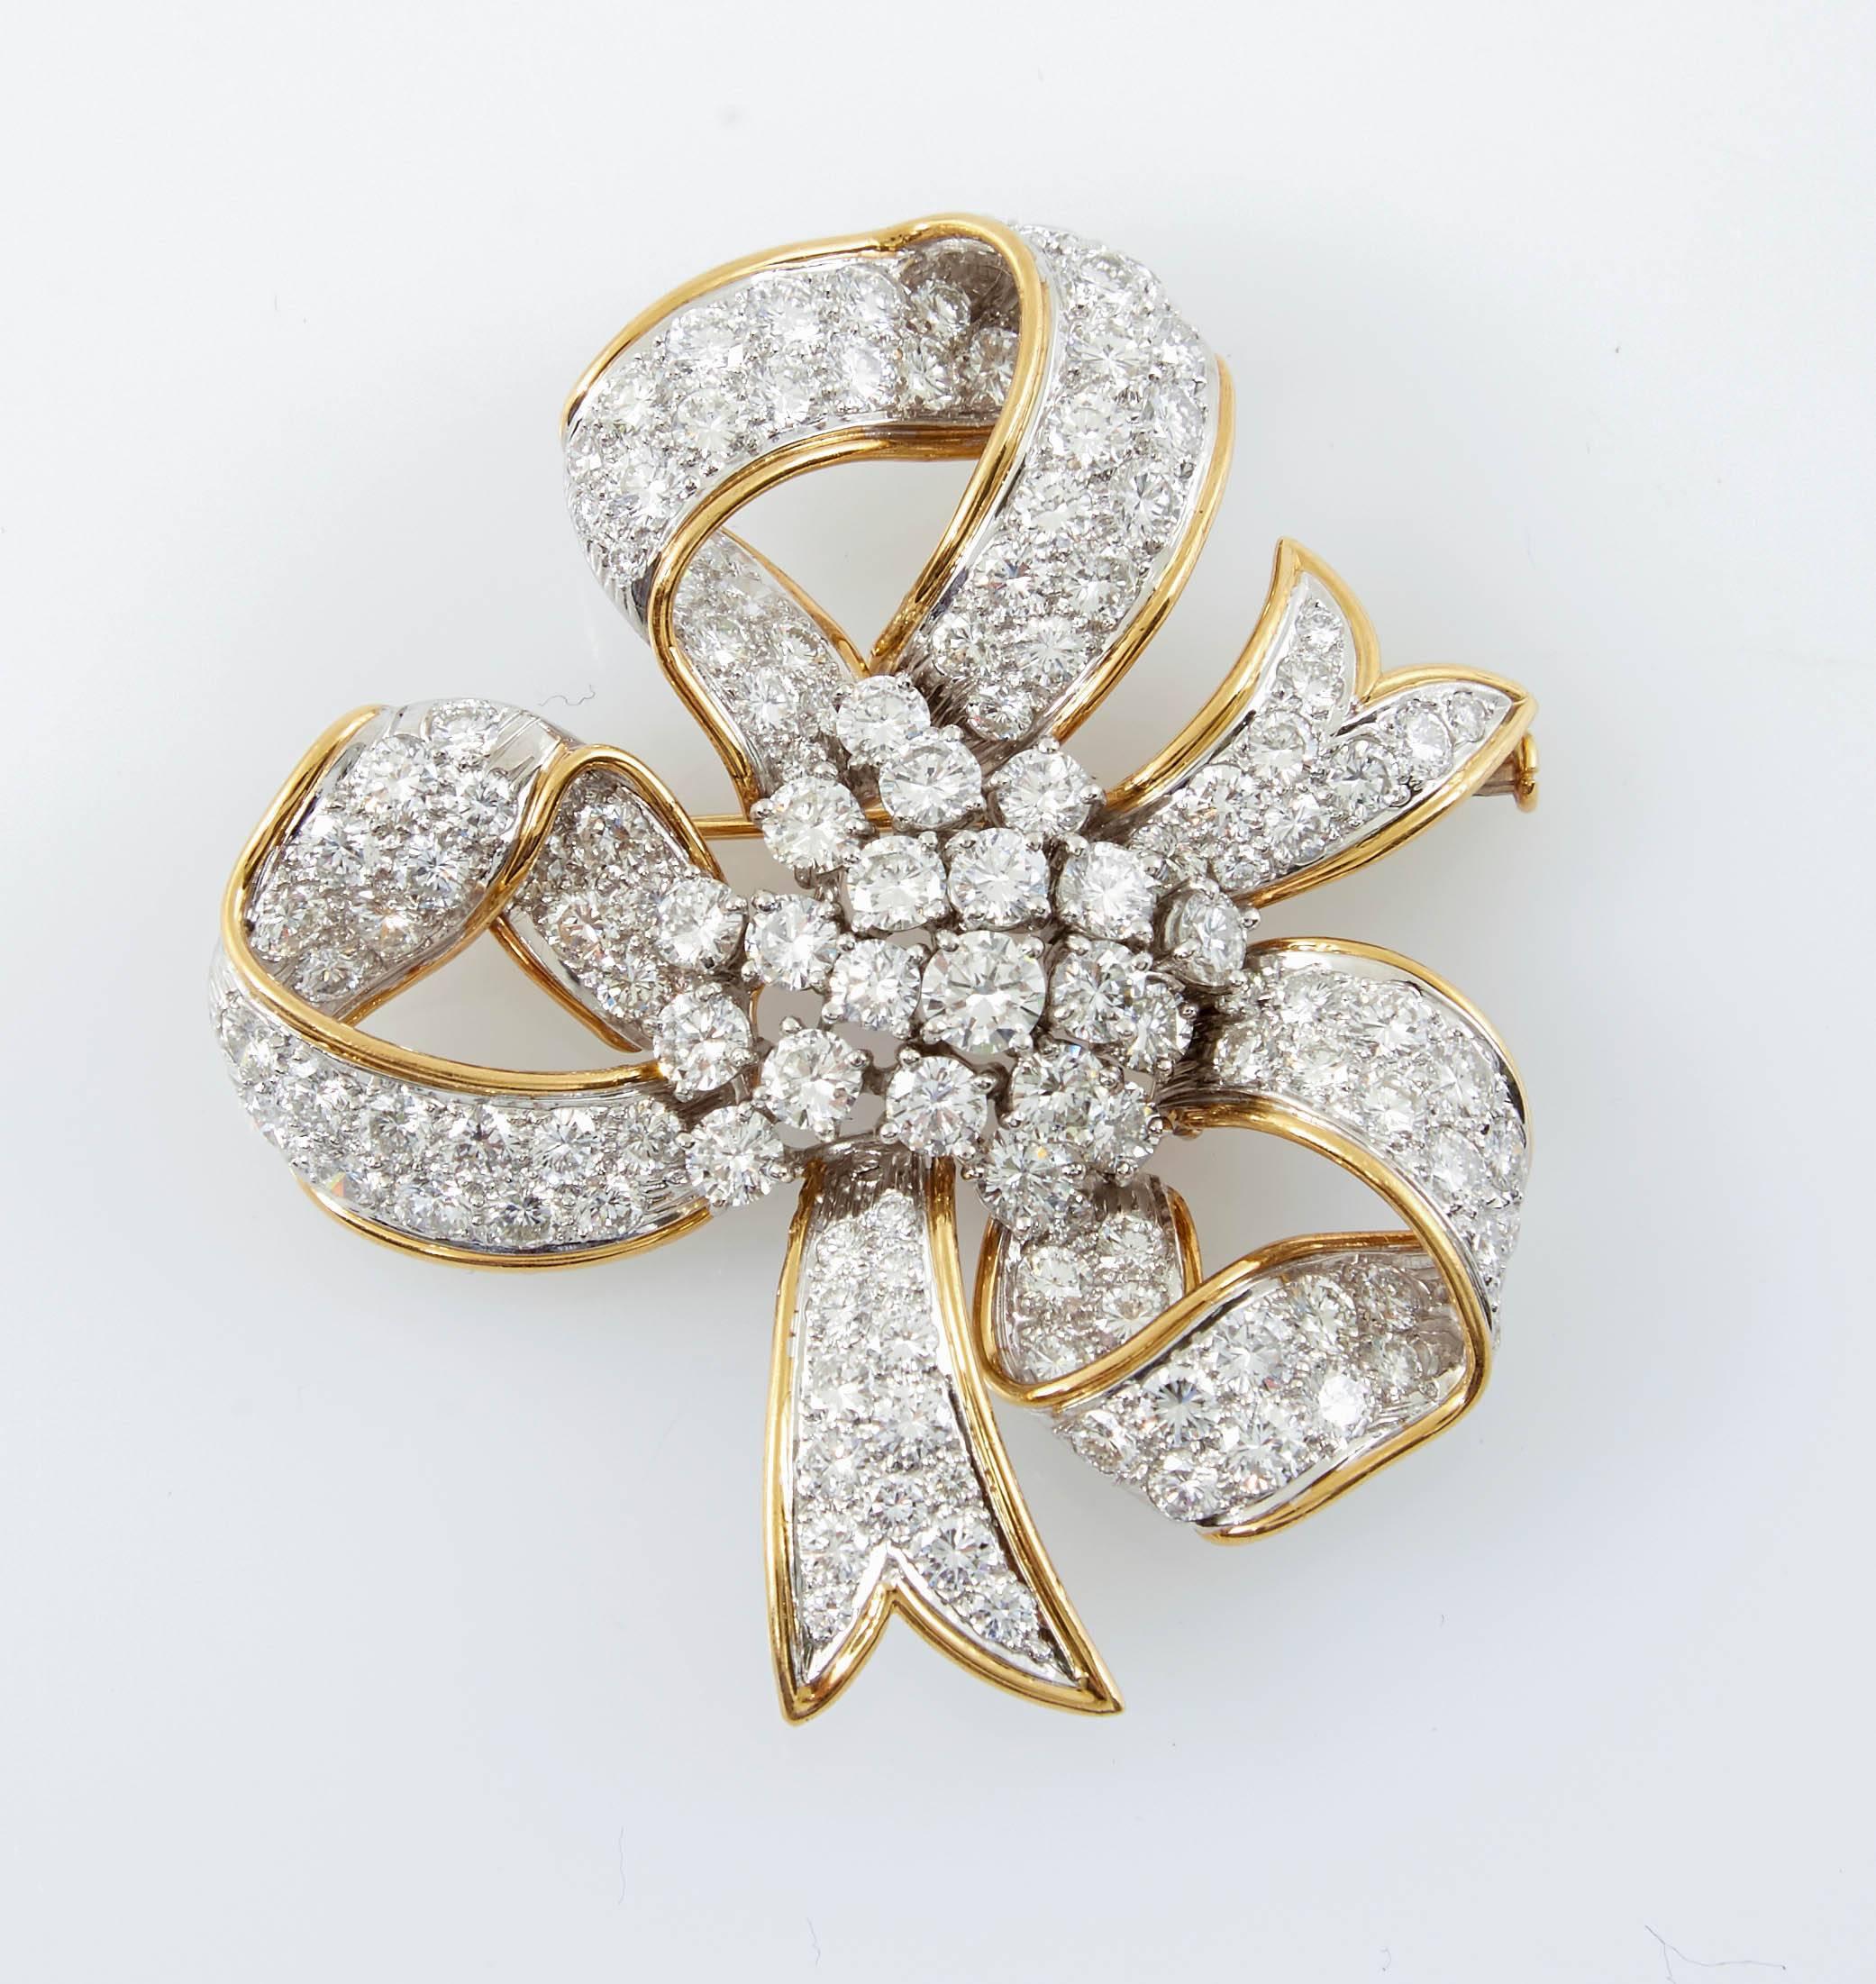 Beautiful bow brooch is finely crafted in 18k yellow gold and platinum with diamonds, weighing a total of approximately 12.00 Carat.
Signed David Webb